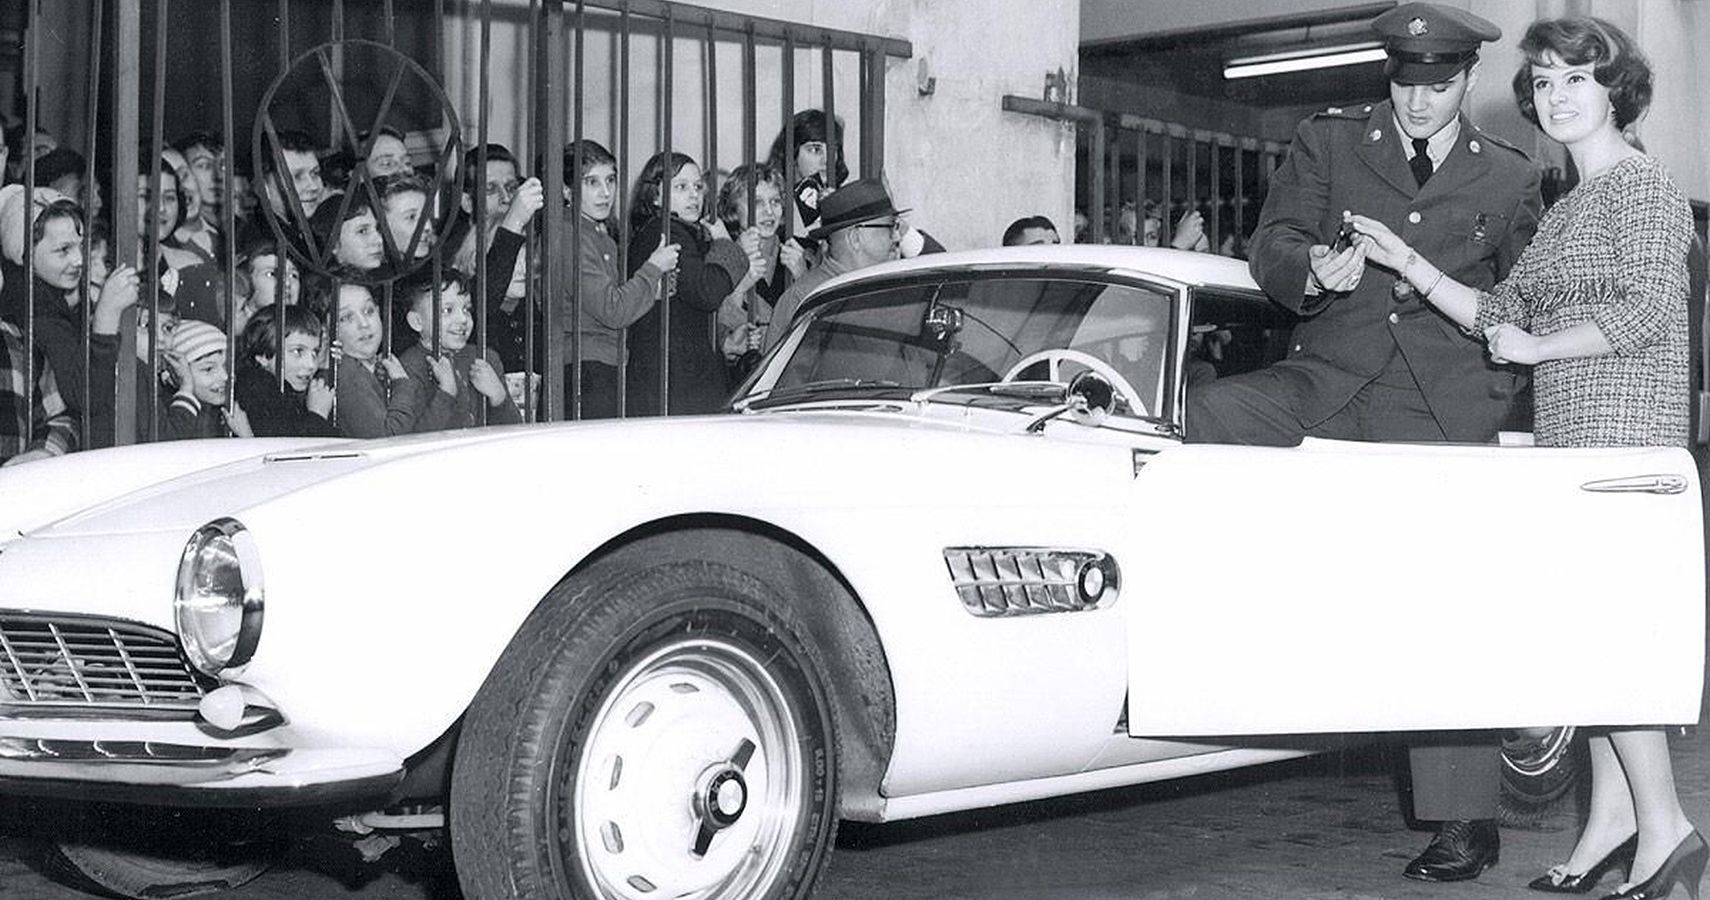 1958 BMW 507 Roadster: For The Soldier In Presley